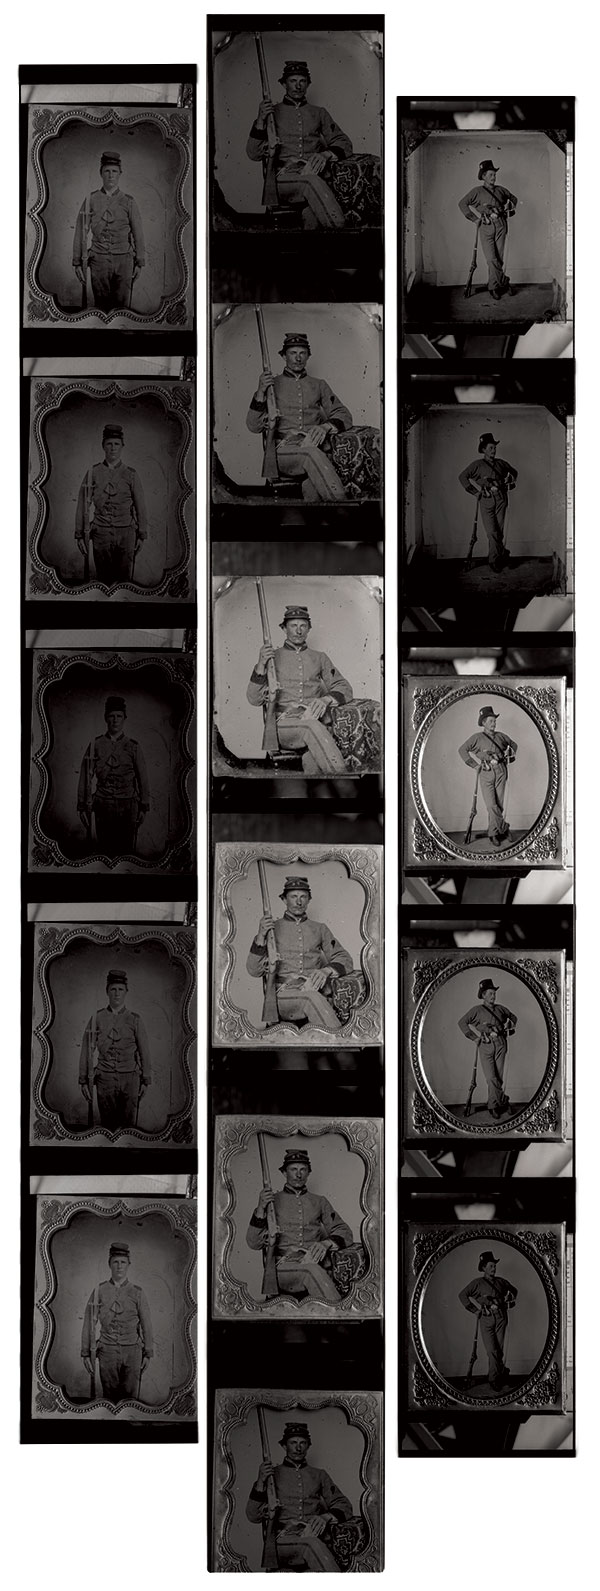 Herb’s negatives reveal how he adjusted lighting, shooting multiple frames of each image. He made further adjustments to images during the printmaking process.